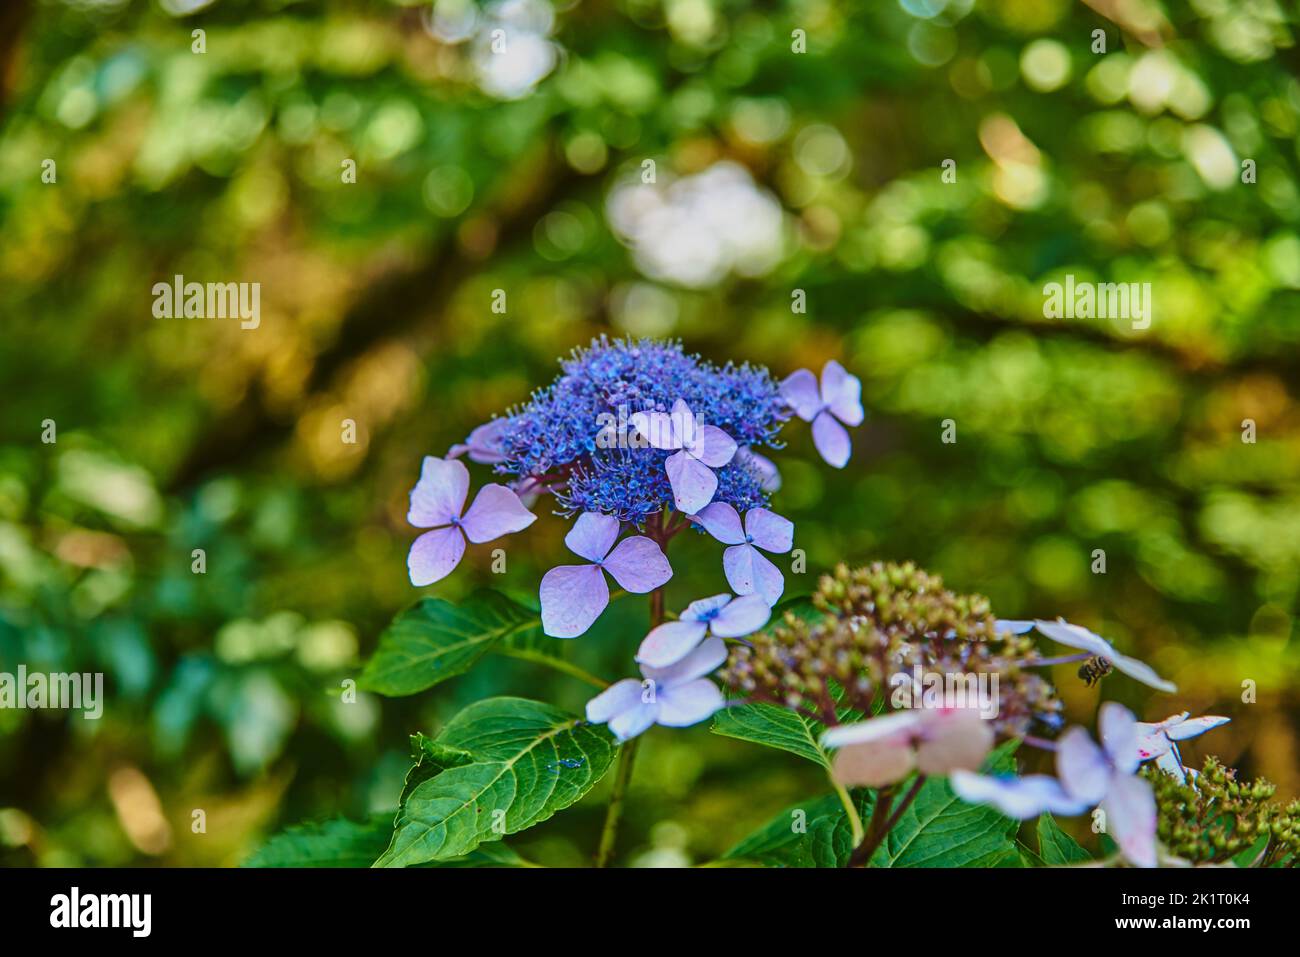 Lilac hydrangea flower on a green background of lush foliage. A symbol of summer, happiness and joy. Stock Photo